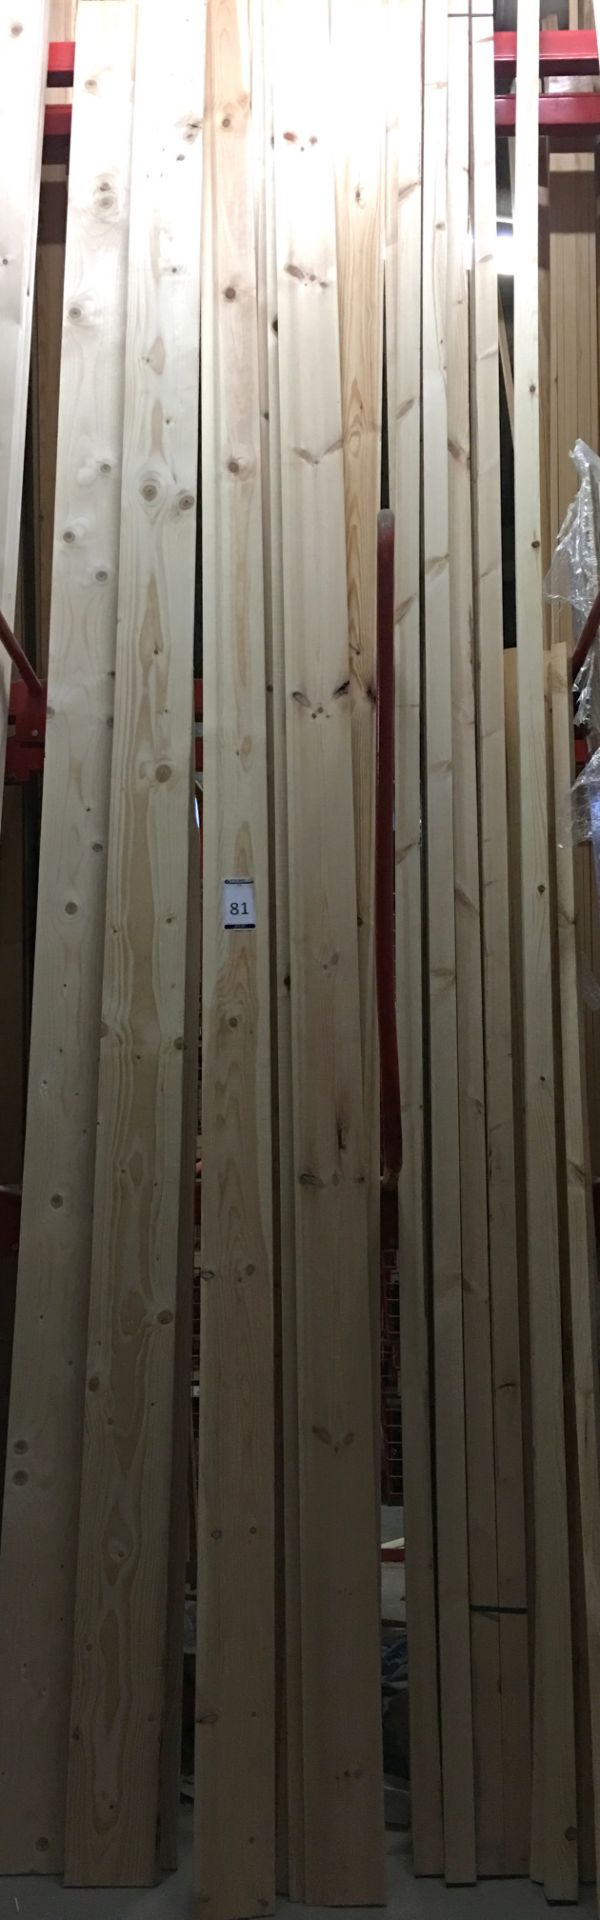 Softwood Lengths, Various Dimensions (Contents of 2 Dividers) (located at Tooting, viewing Tuesday